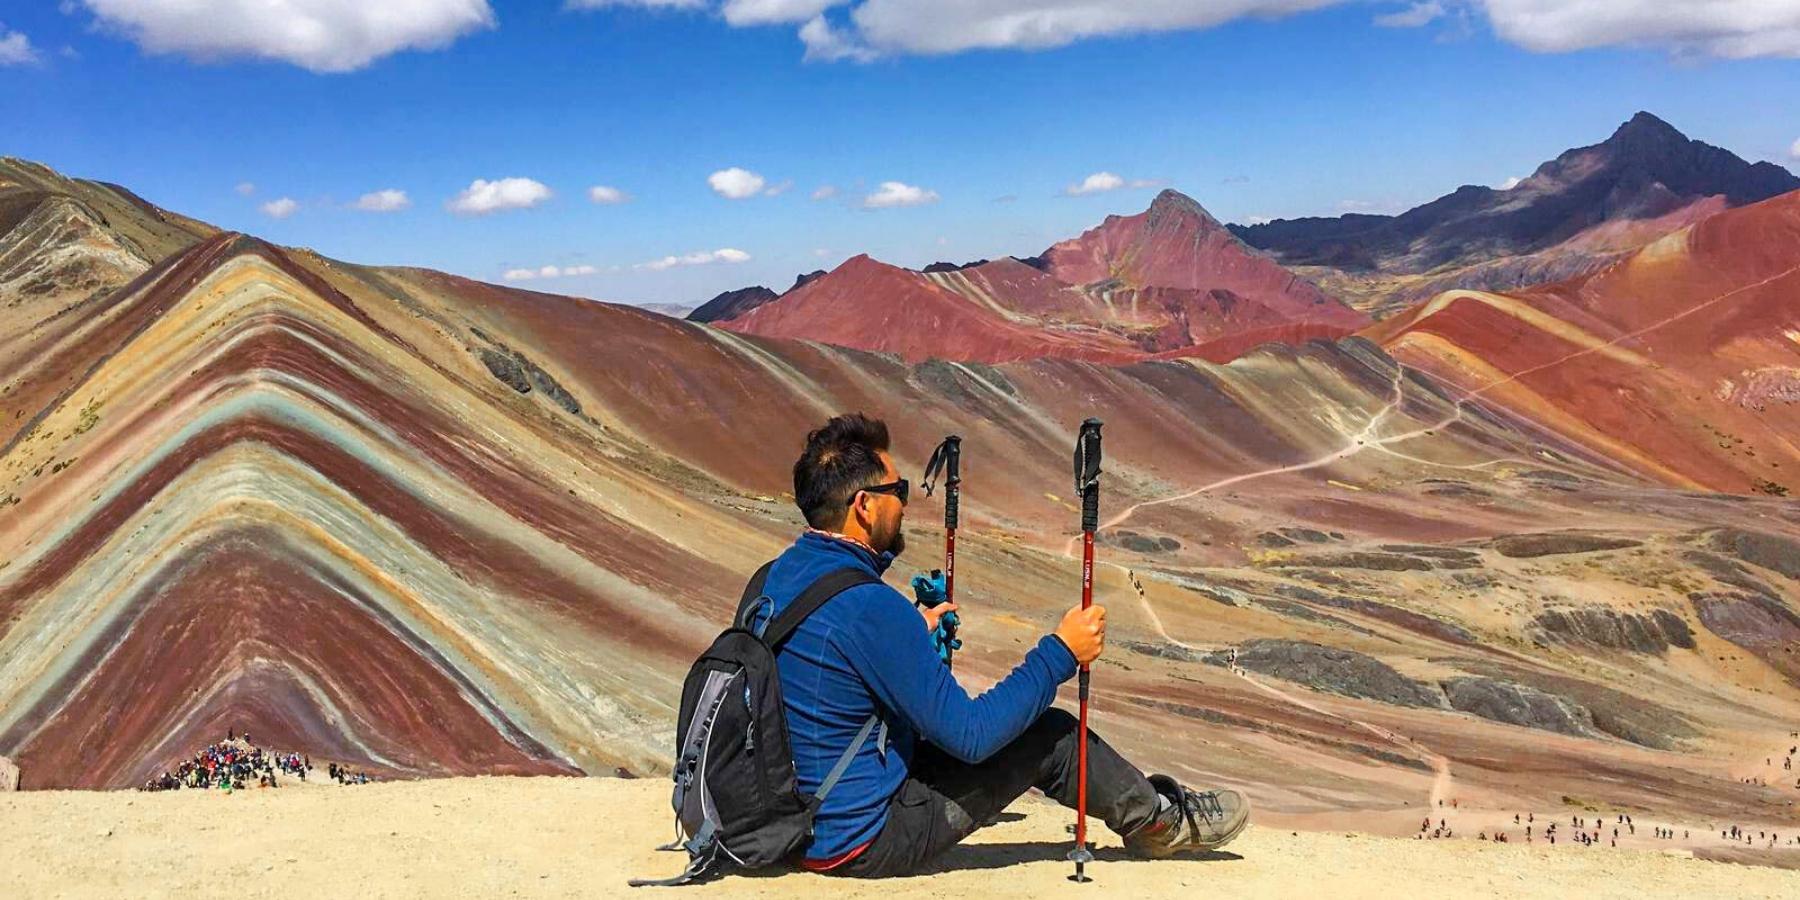 vinicunca rainbow mountain by inca trail expeditions